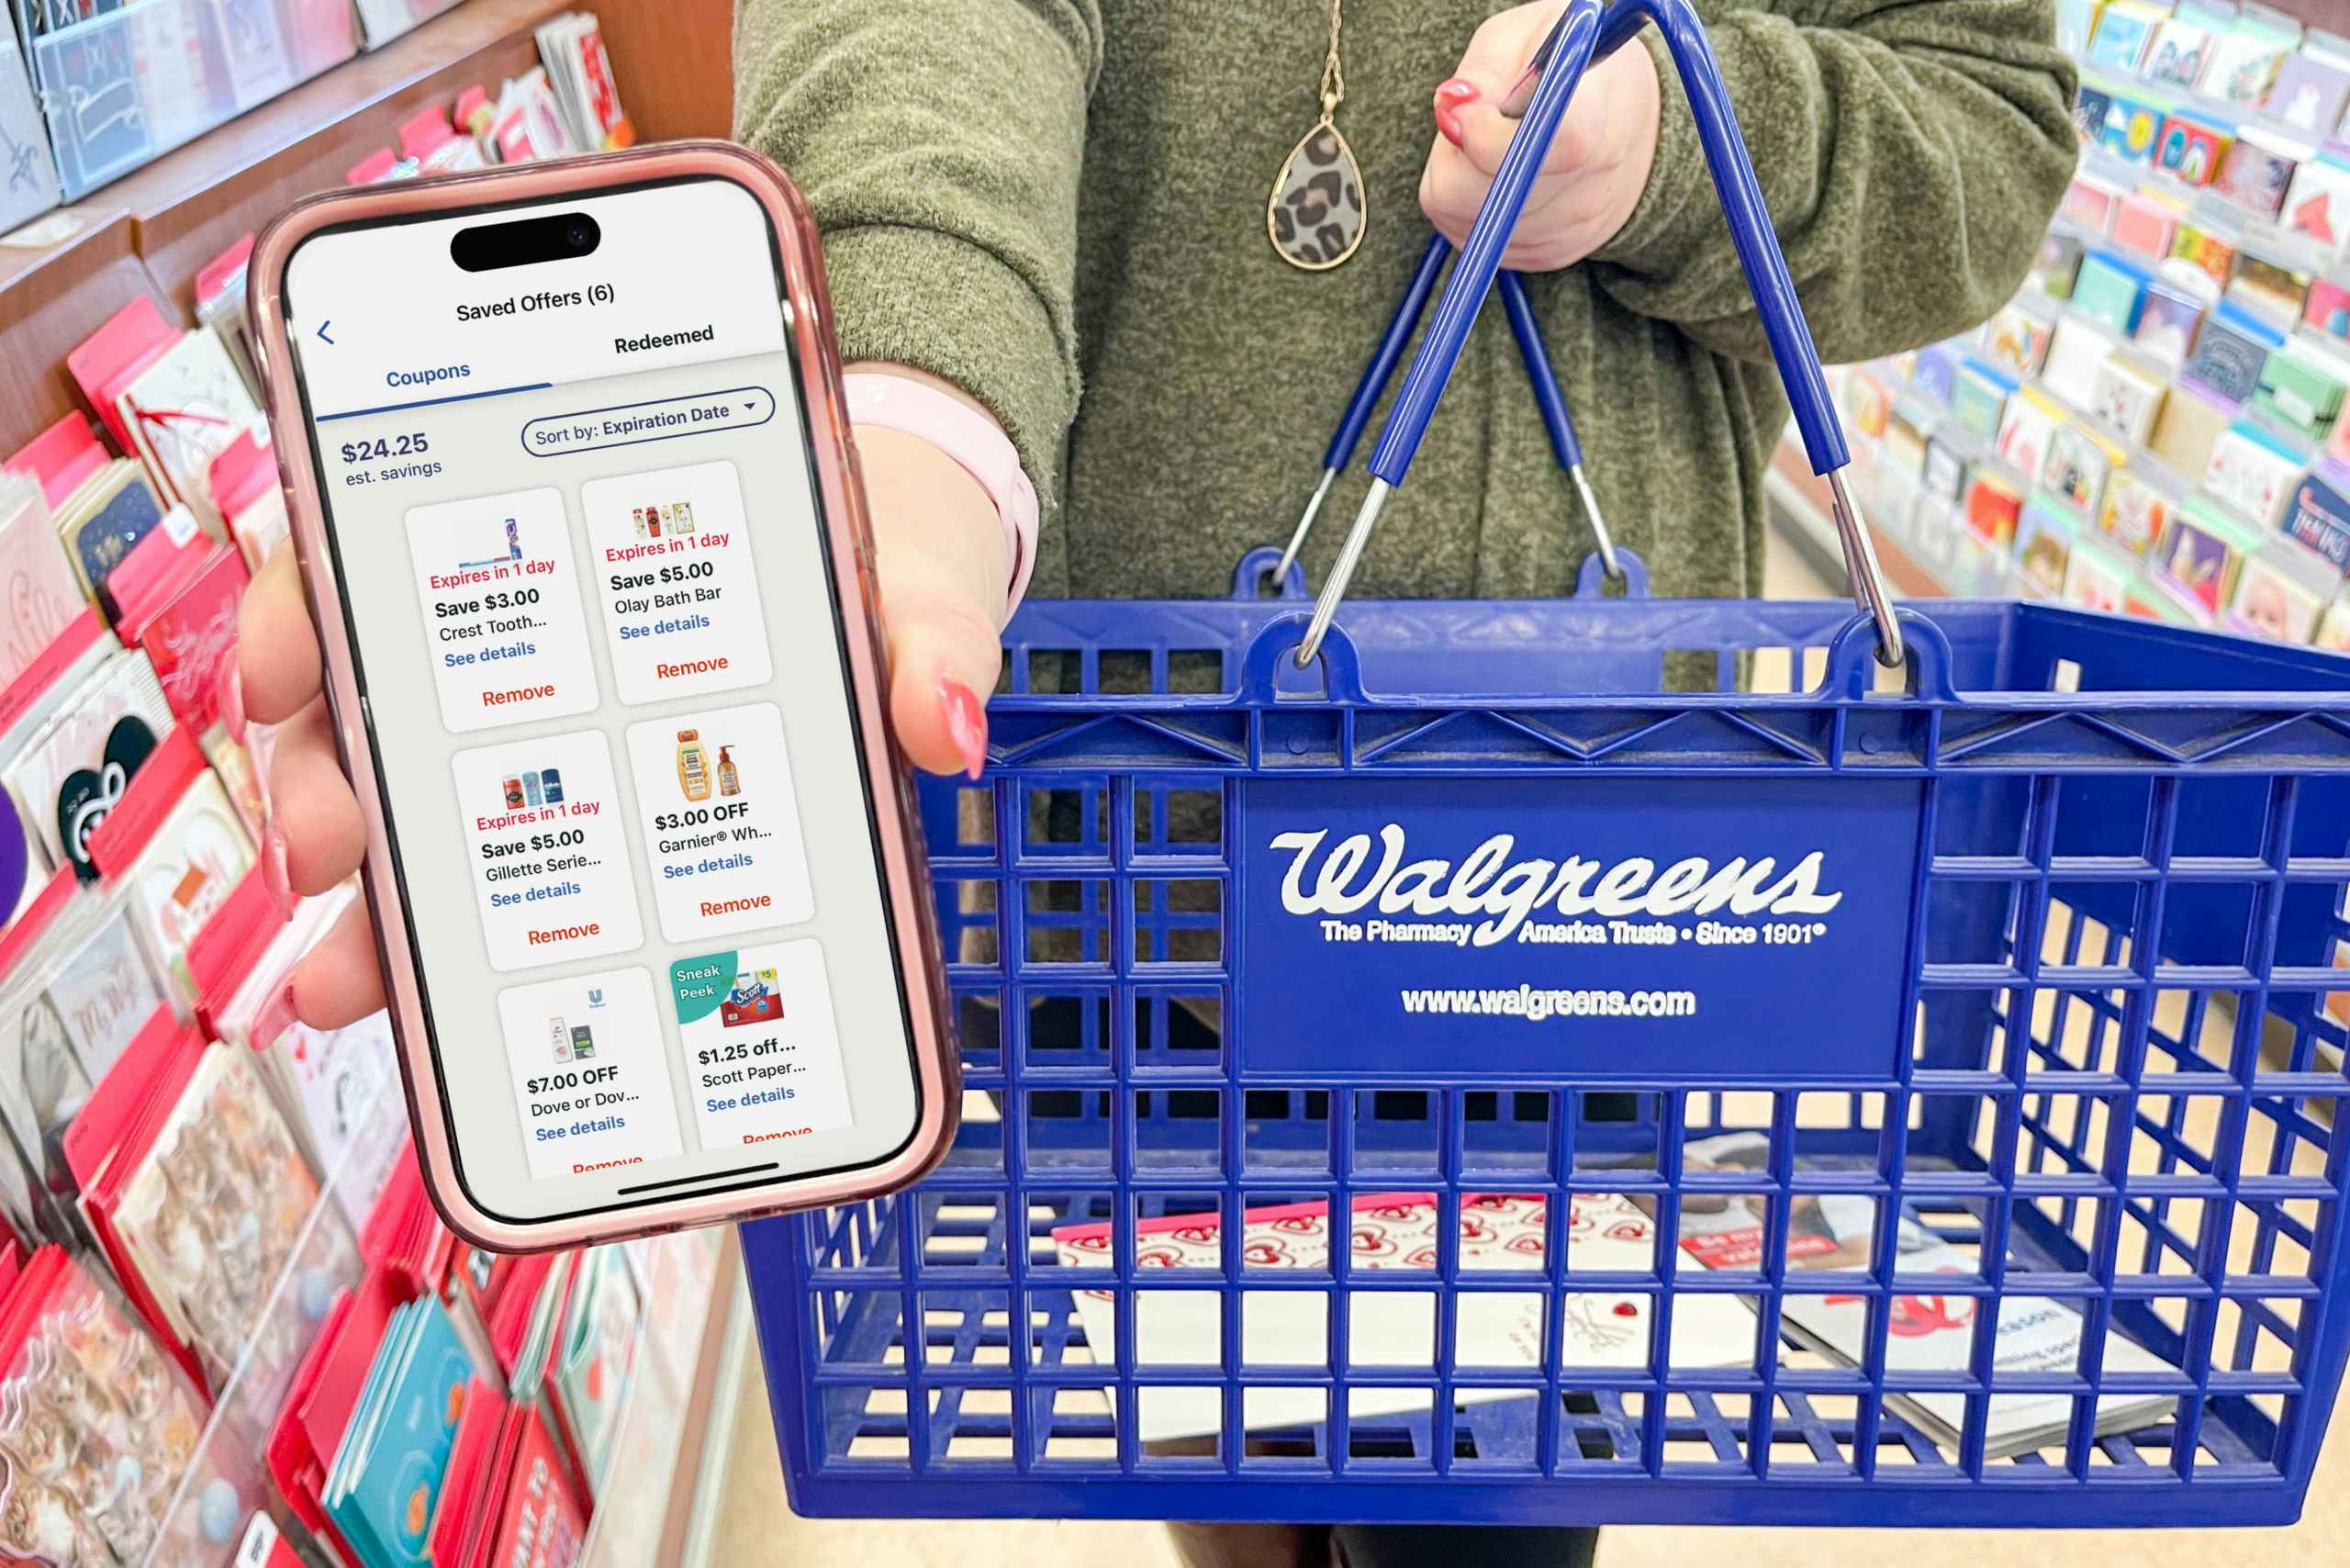 Someone holding a phone displaying the coupons in the Walgreens app and holding a Walgreens shopping basket